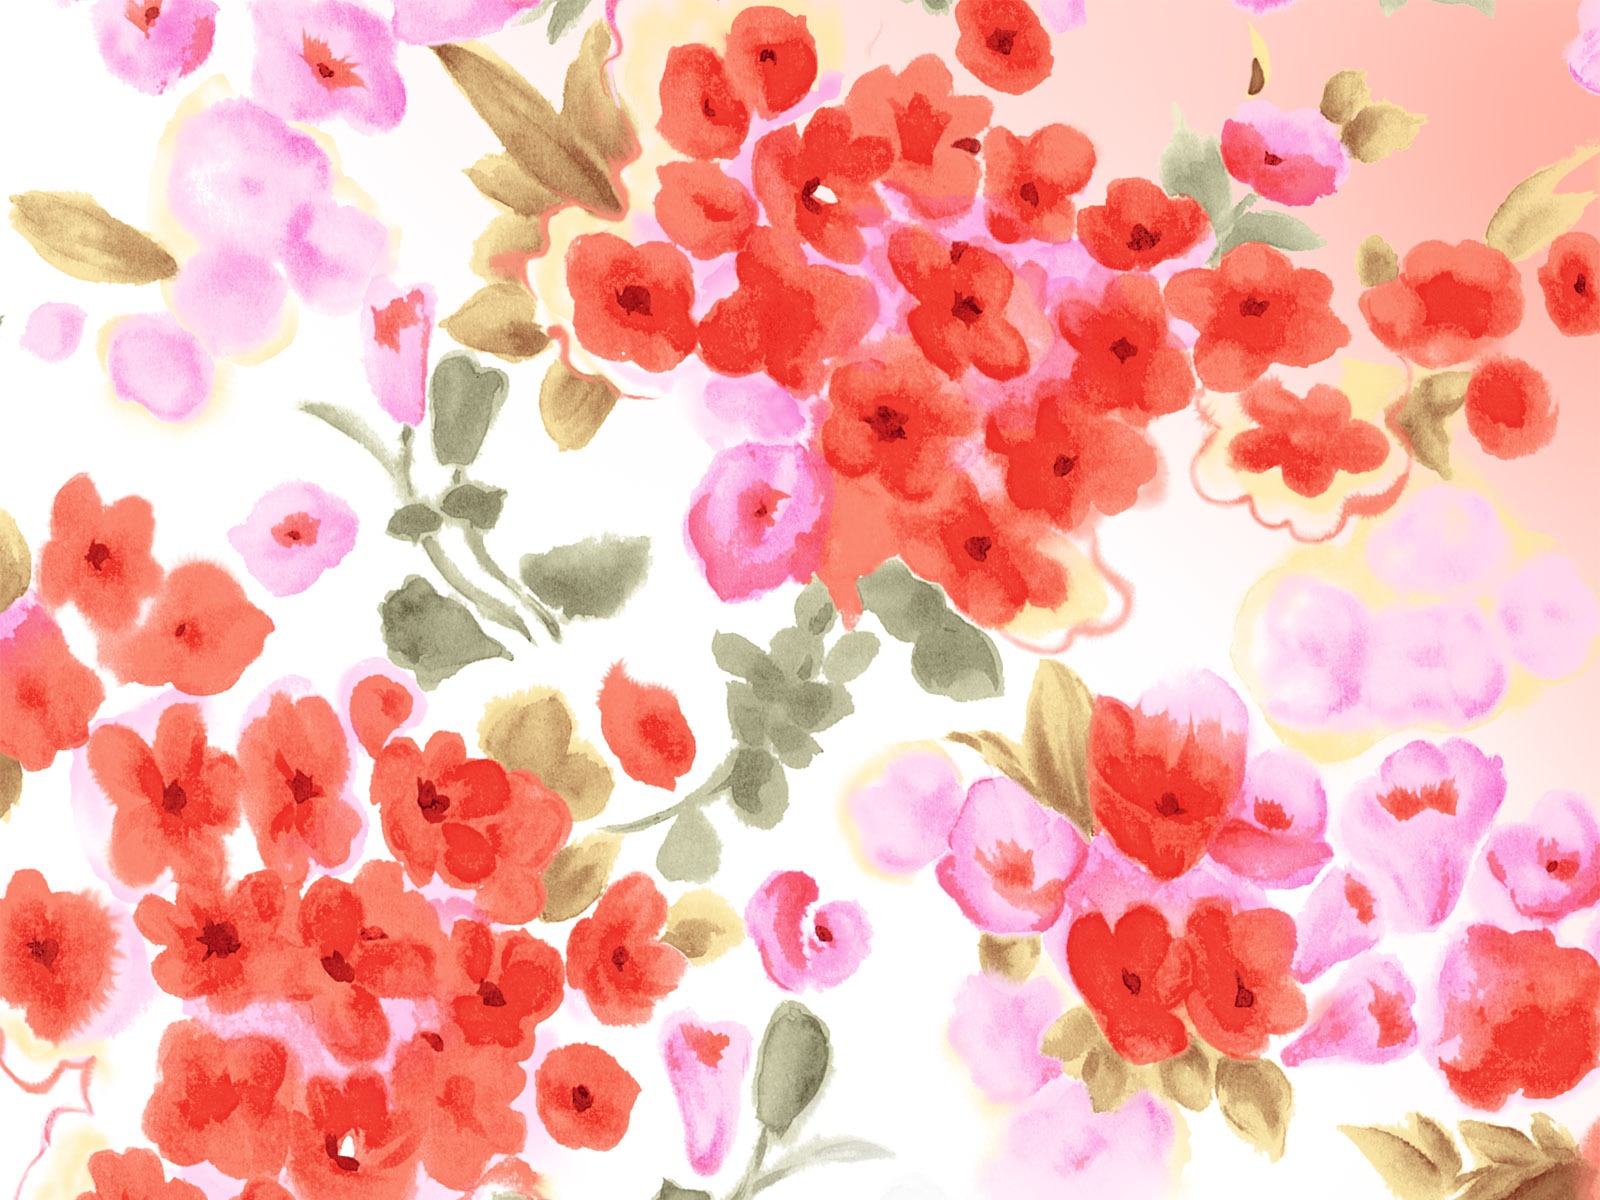 Synthetic Flower Wallpapers (2) #5 - 1600x1200